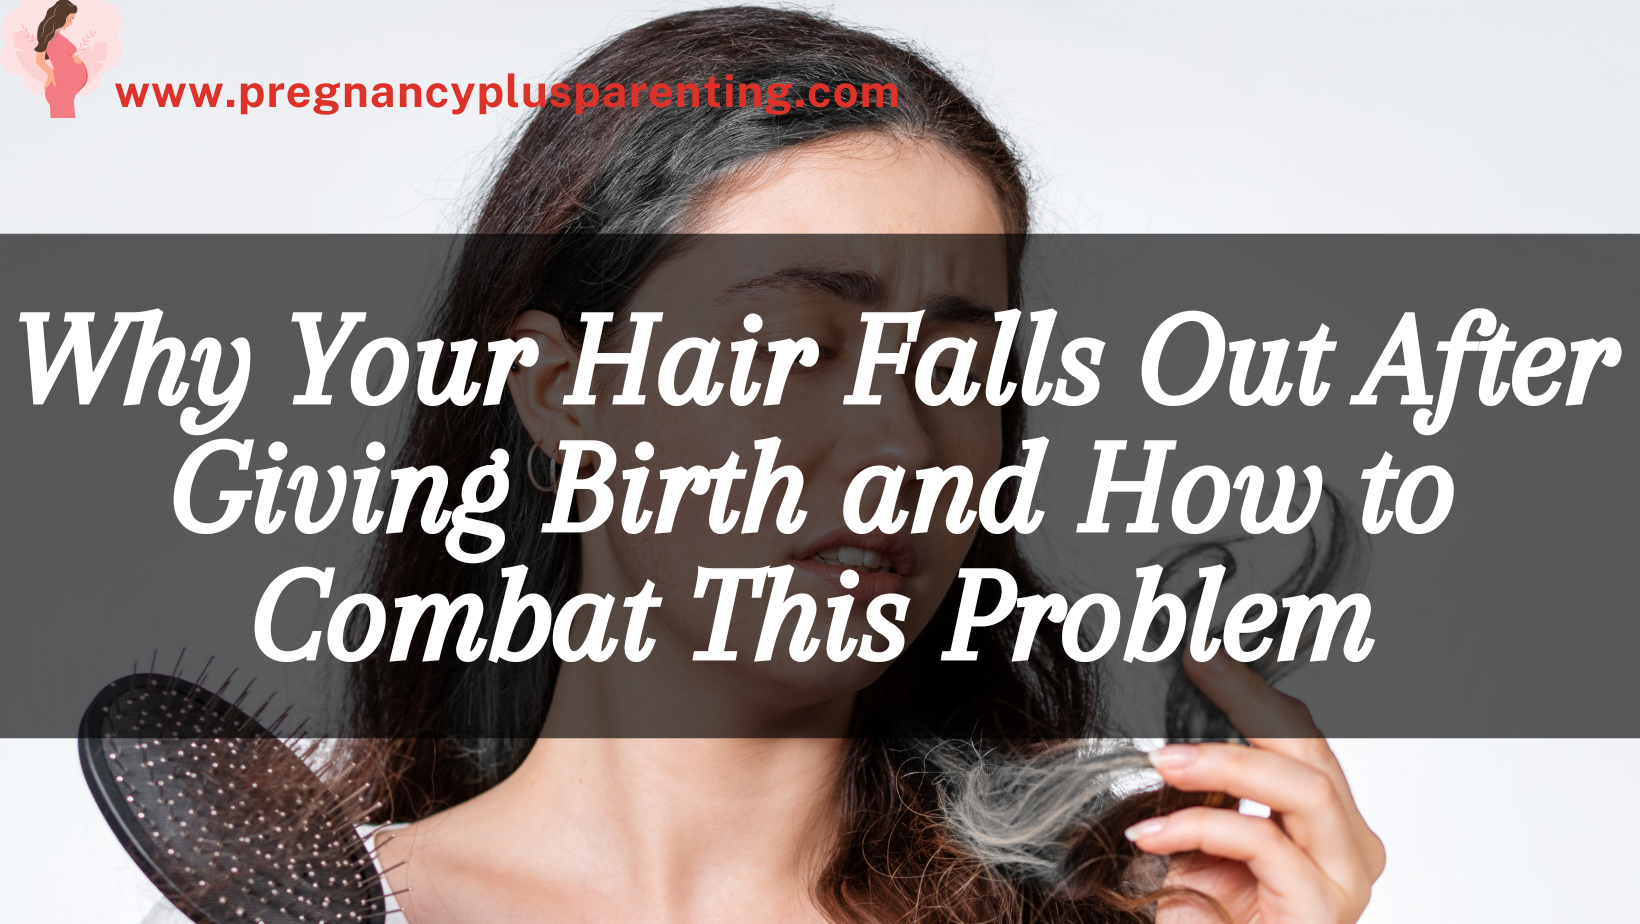 Why Your Hair Falls Out After Giving Birth and How to Combat This Problem